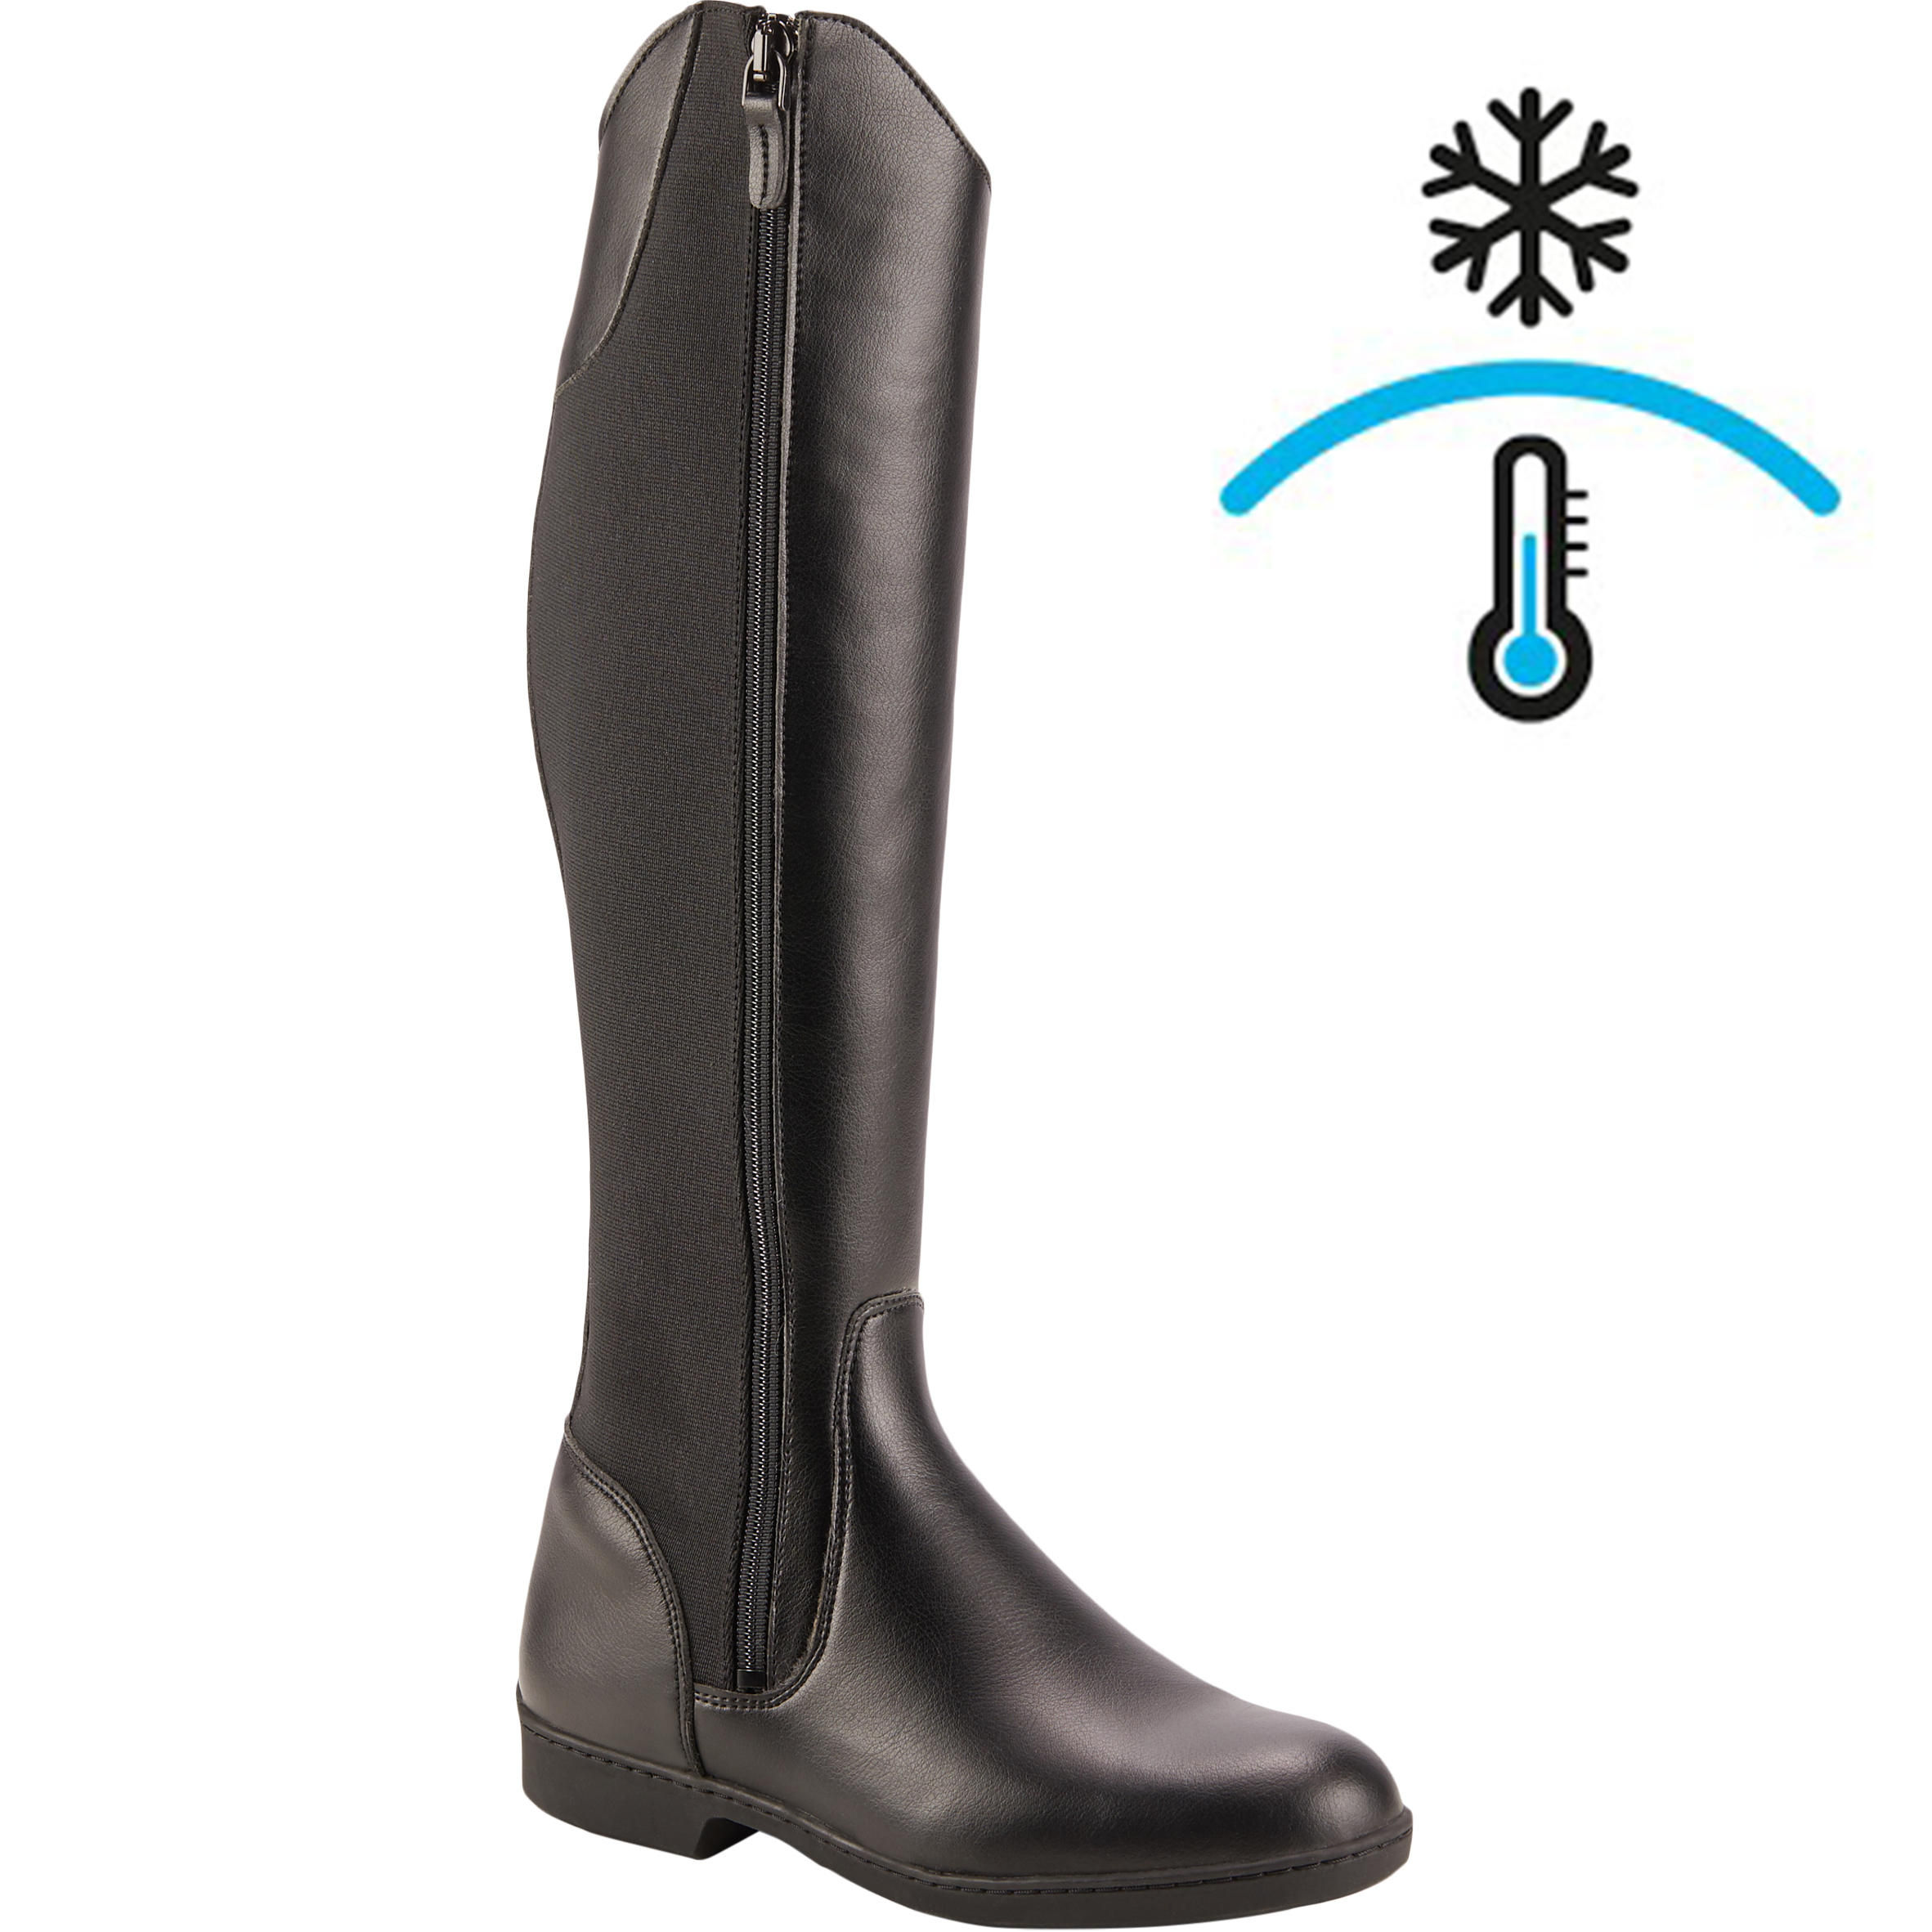 500 Warm Adult Horse Riding  Long Boots - Black 1/7